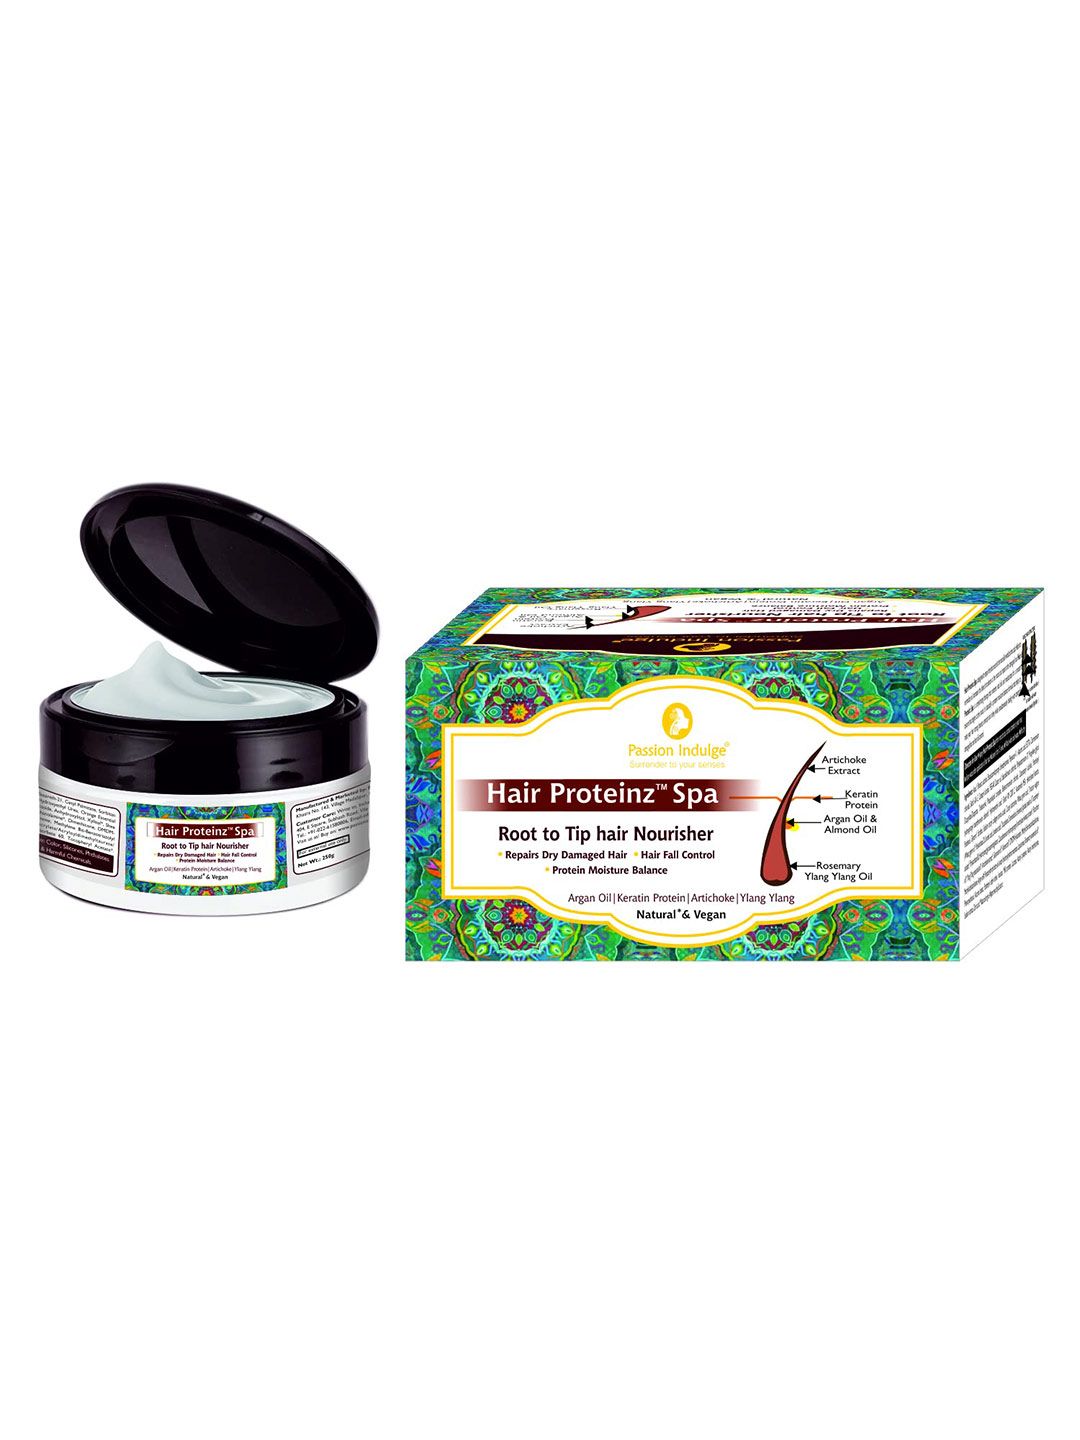 Passion Indulge Hair Proteinz Spa Inbuilt Protien Booster Cream with Argan Oil - 250 g Price in India